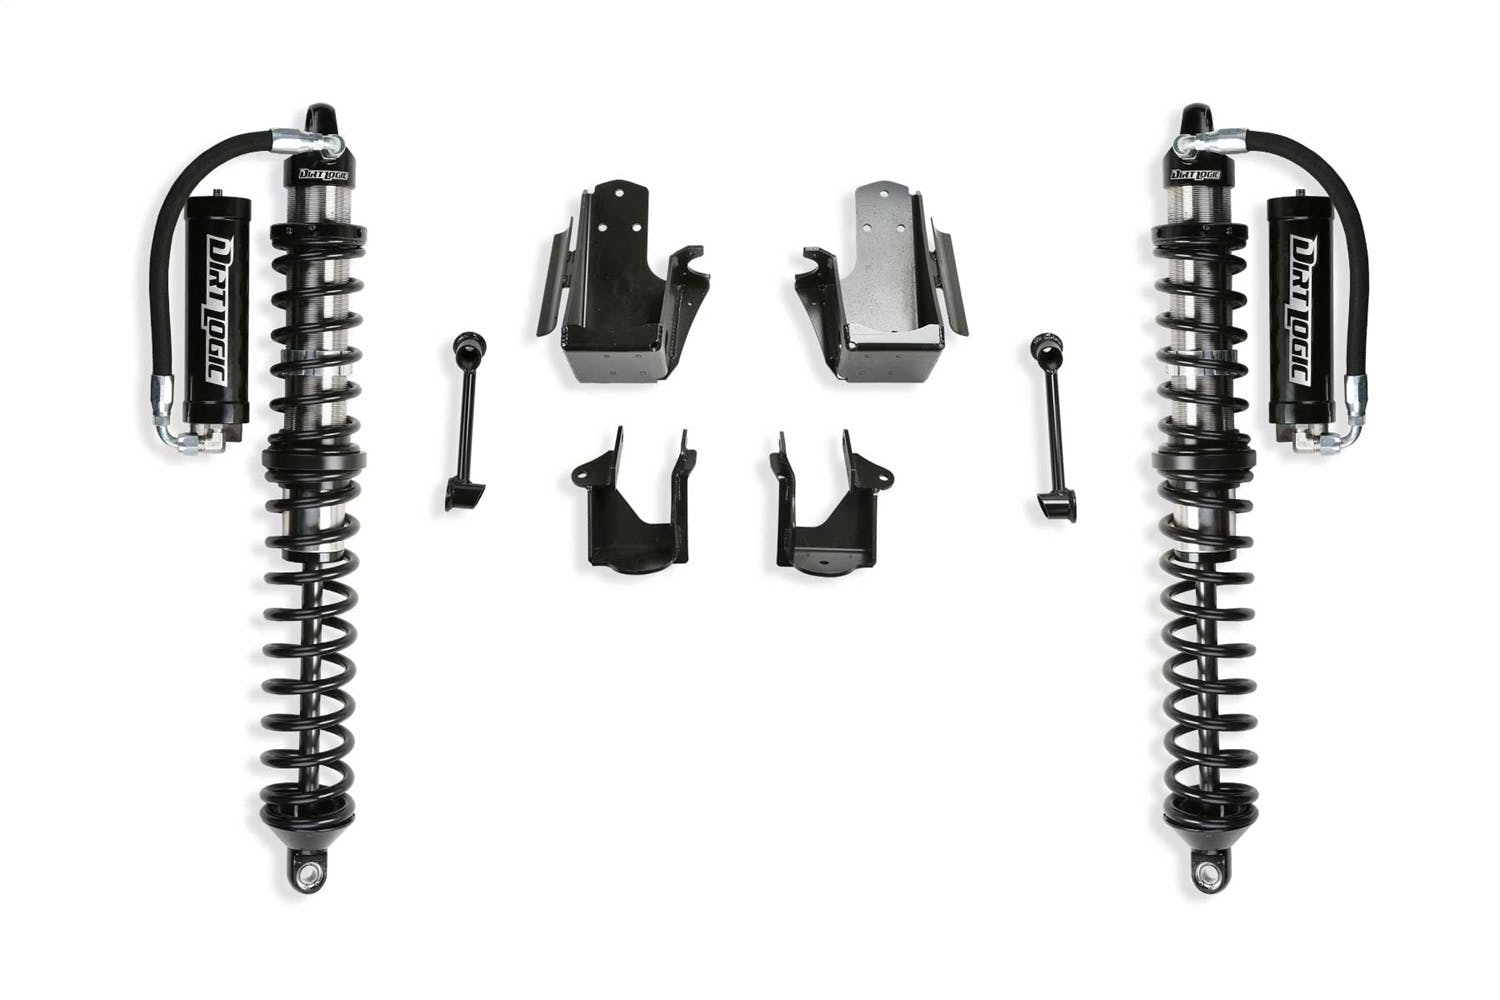 Fabtech K4181DL Crawler Coilover Lift System